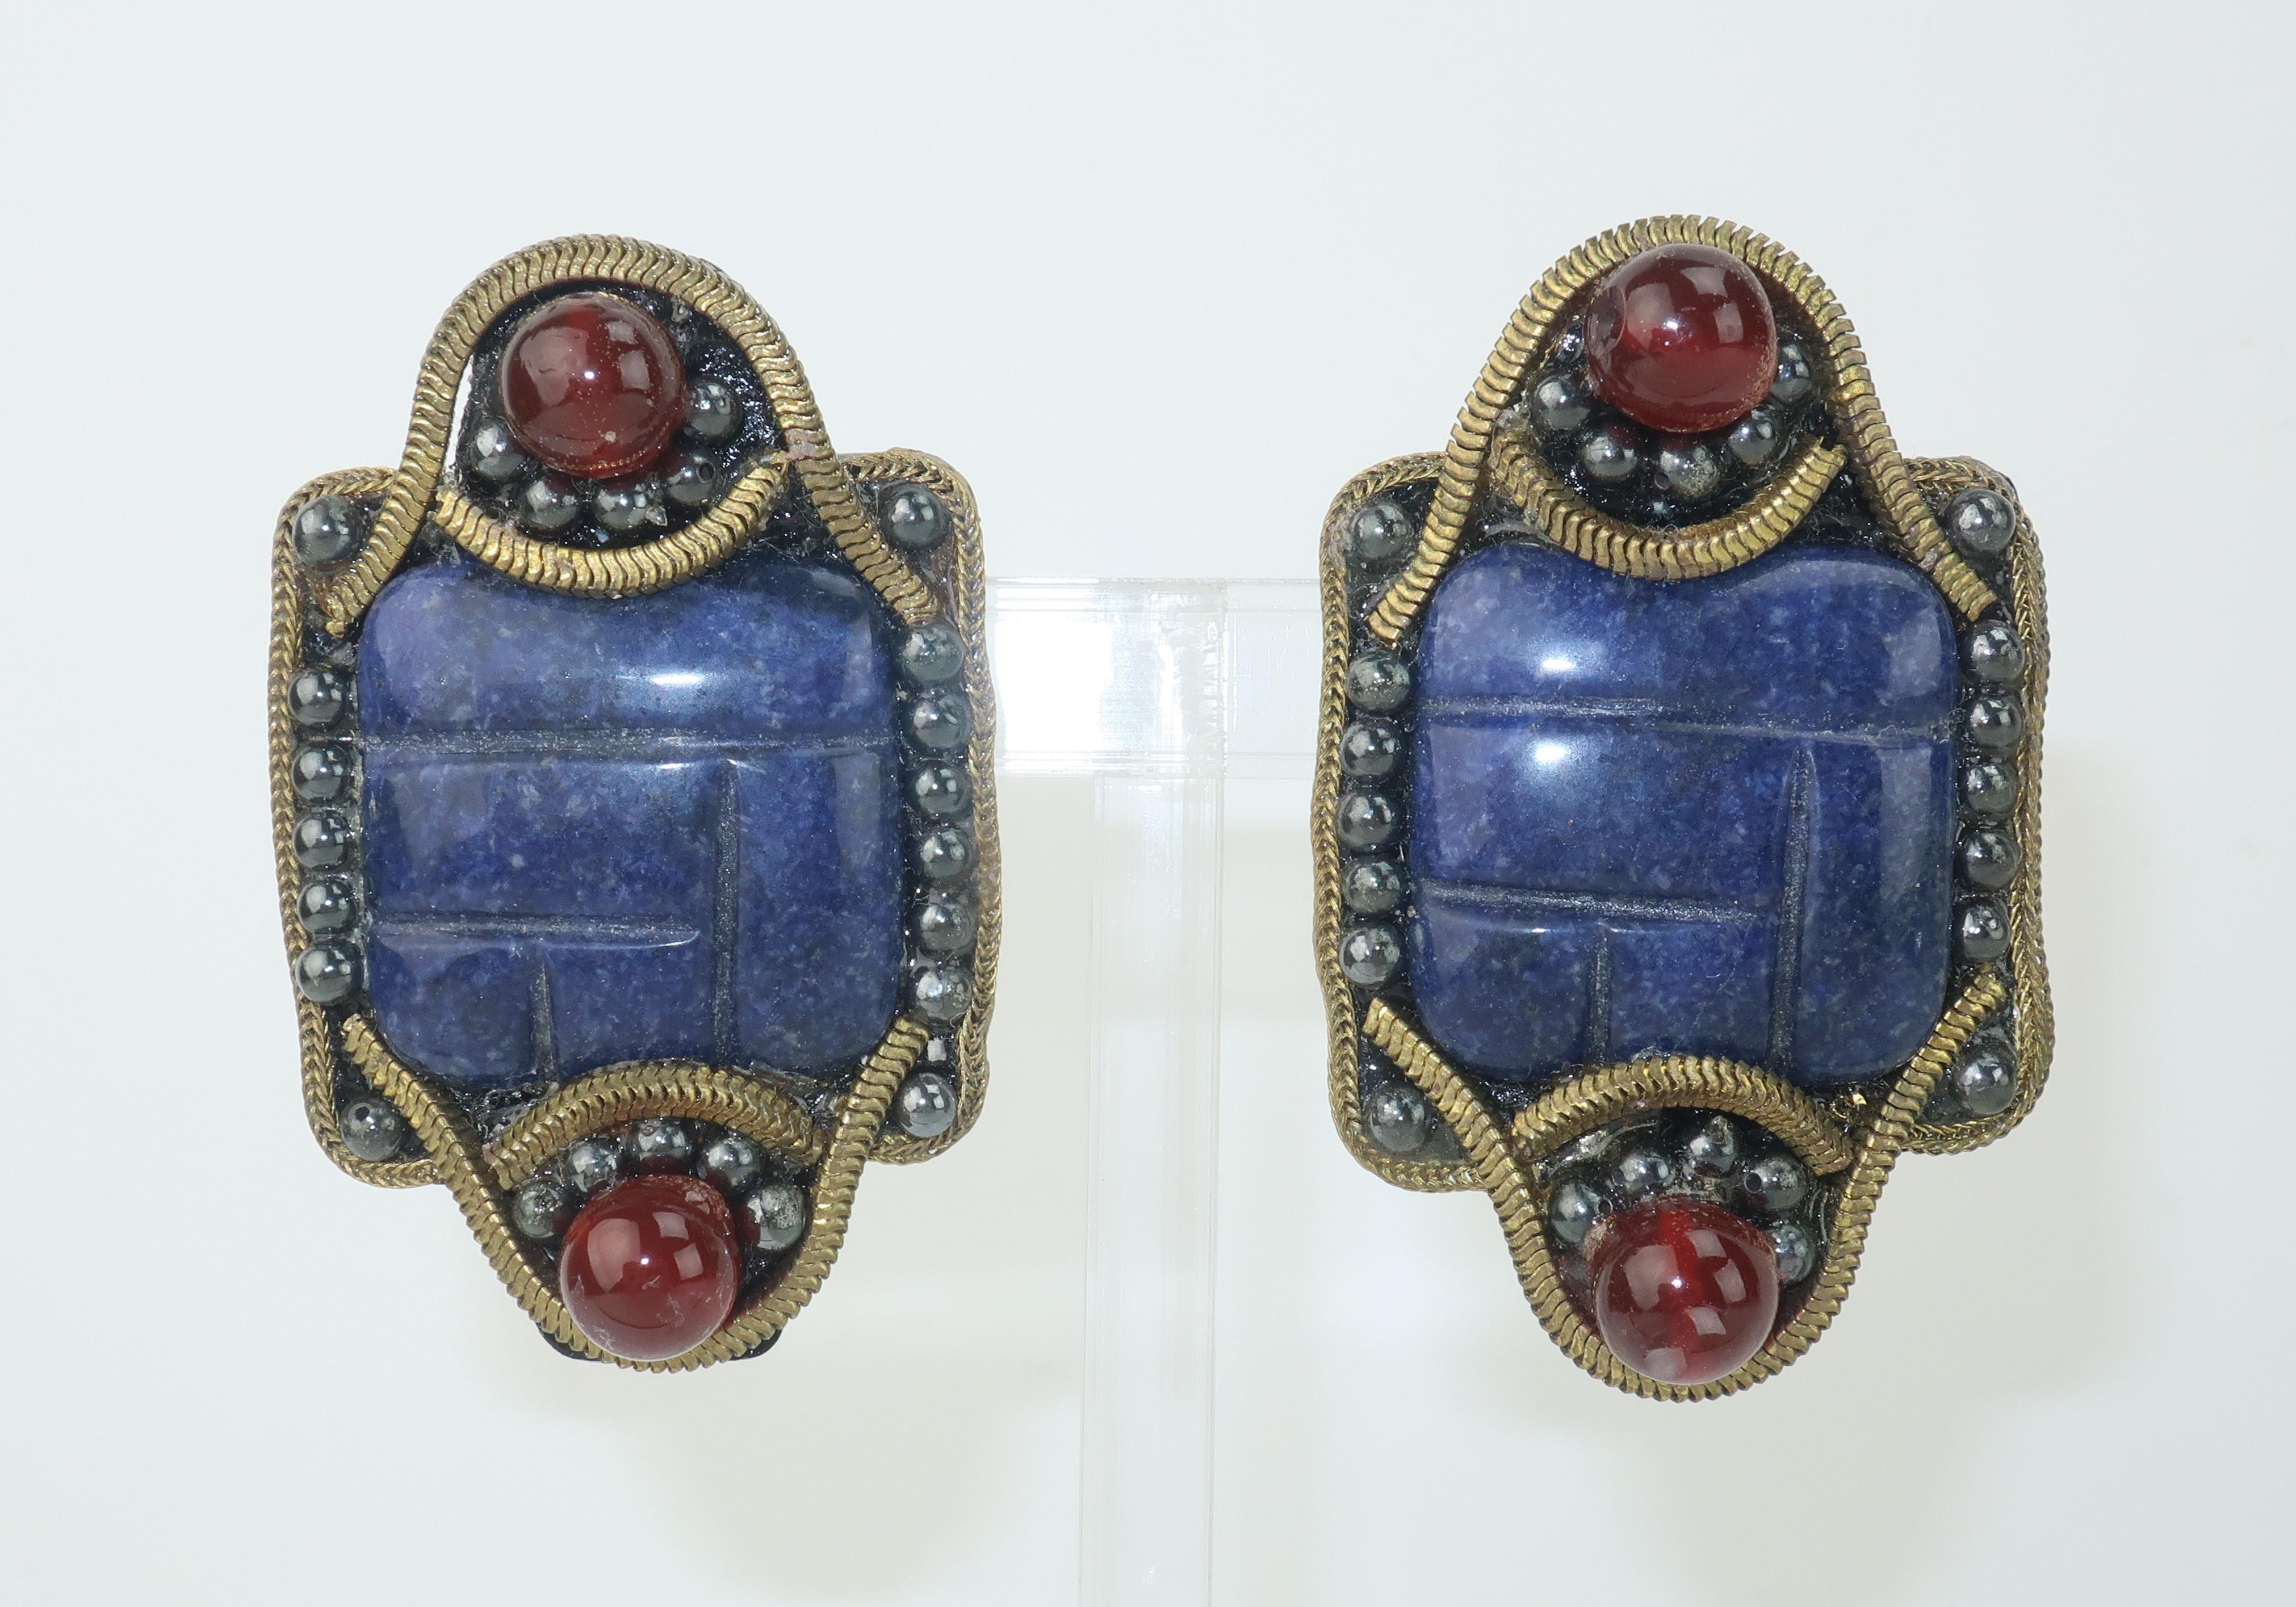 These exotically styled earrings from M & J Hansen are a black resin base accented by blue carved center stones surrounded by carnelian color glass beads and textured chain borders.  Reminiscent of an Egyptian Revival style with a modernist twist. 